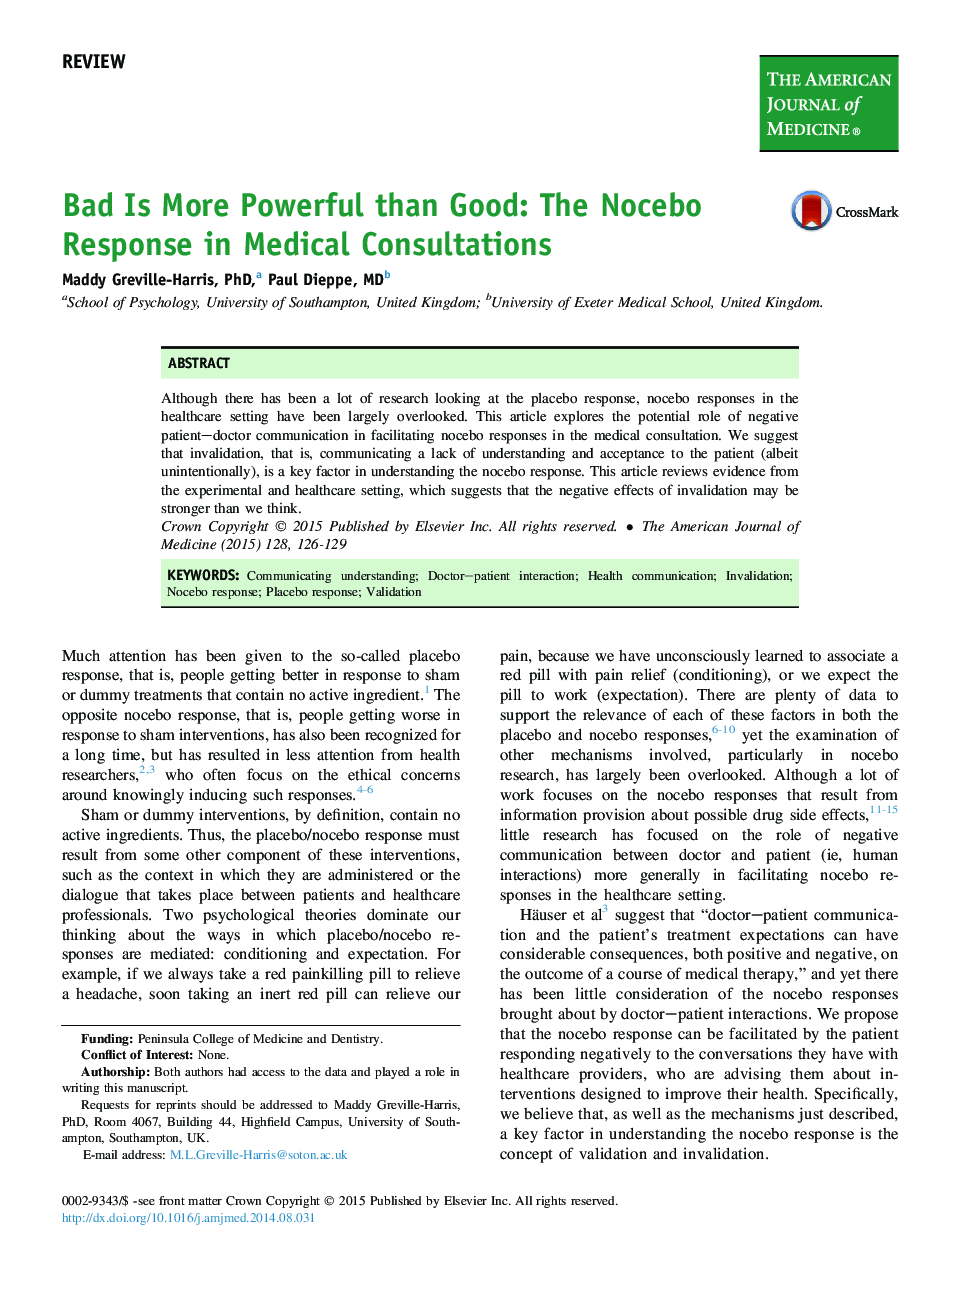 Bad Is More Powerful than Good: The Nocebo Response in Medical Consultations